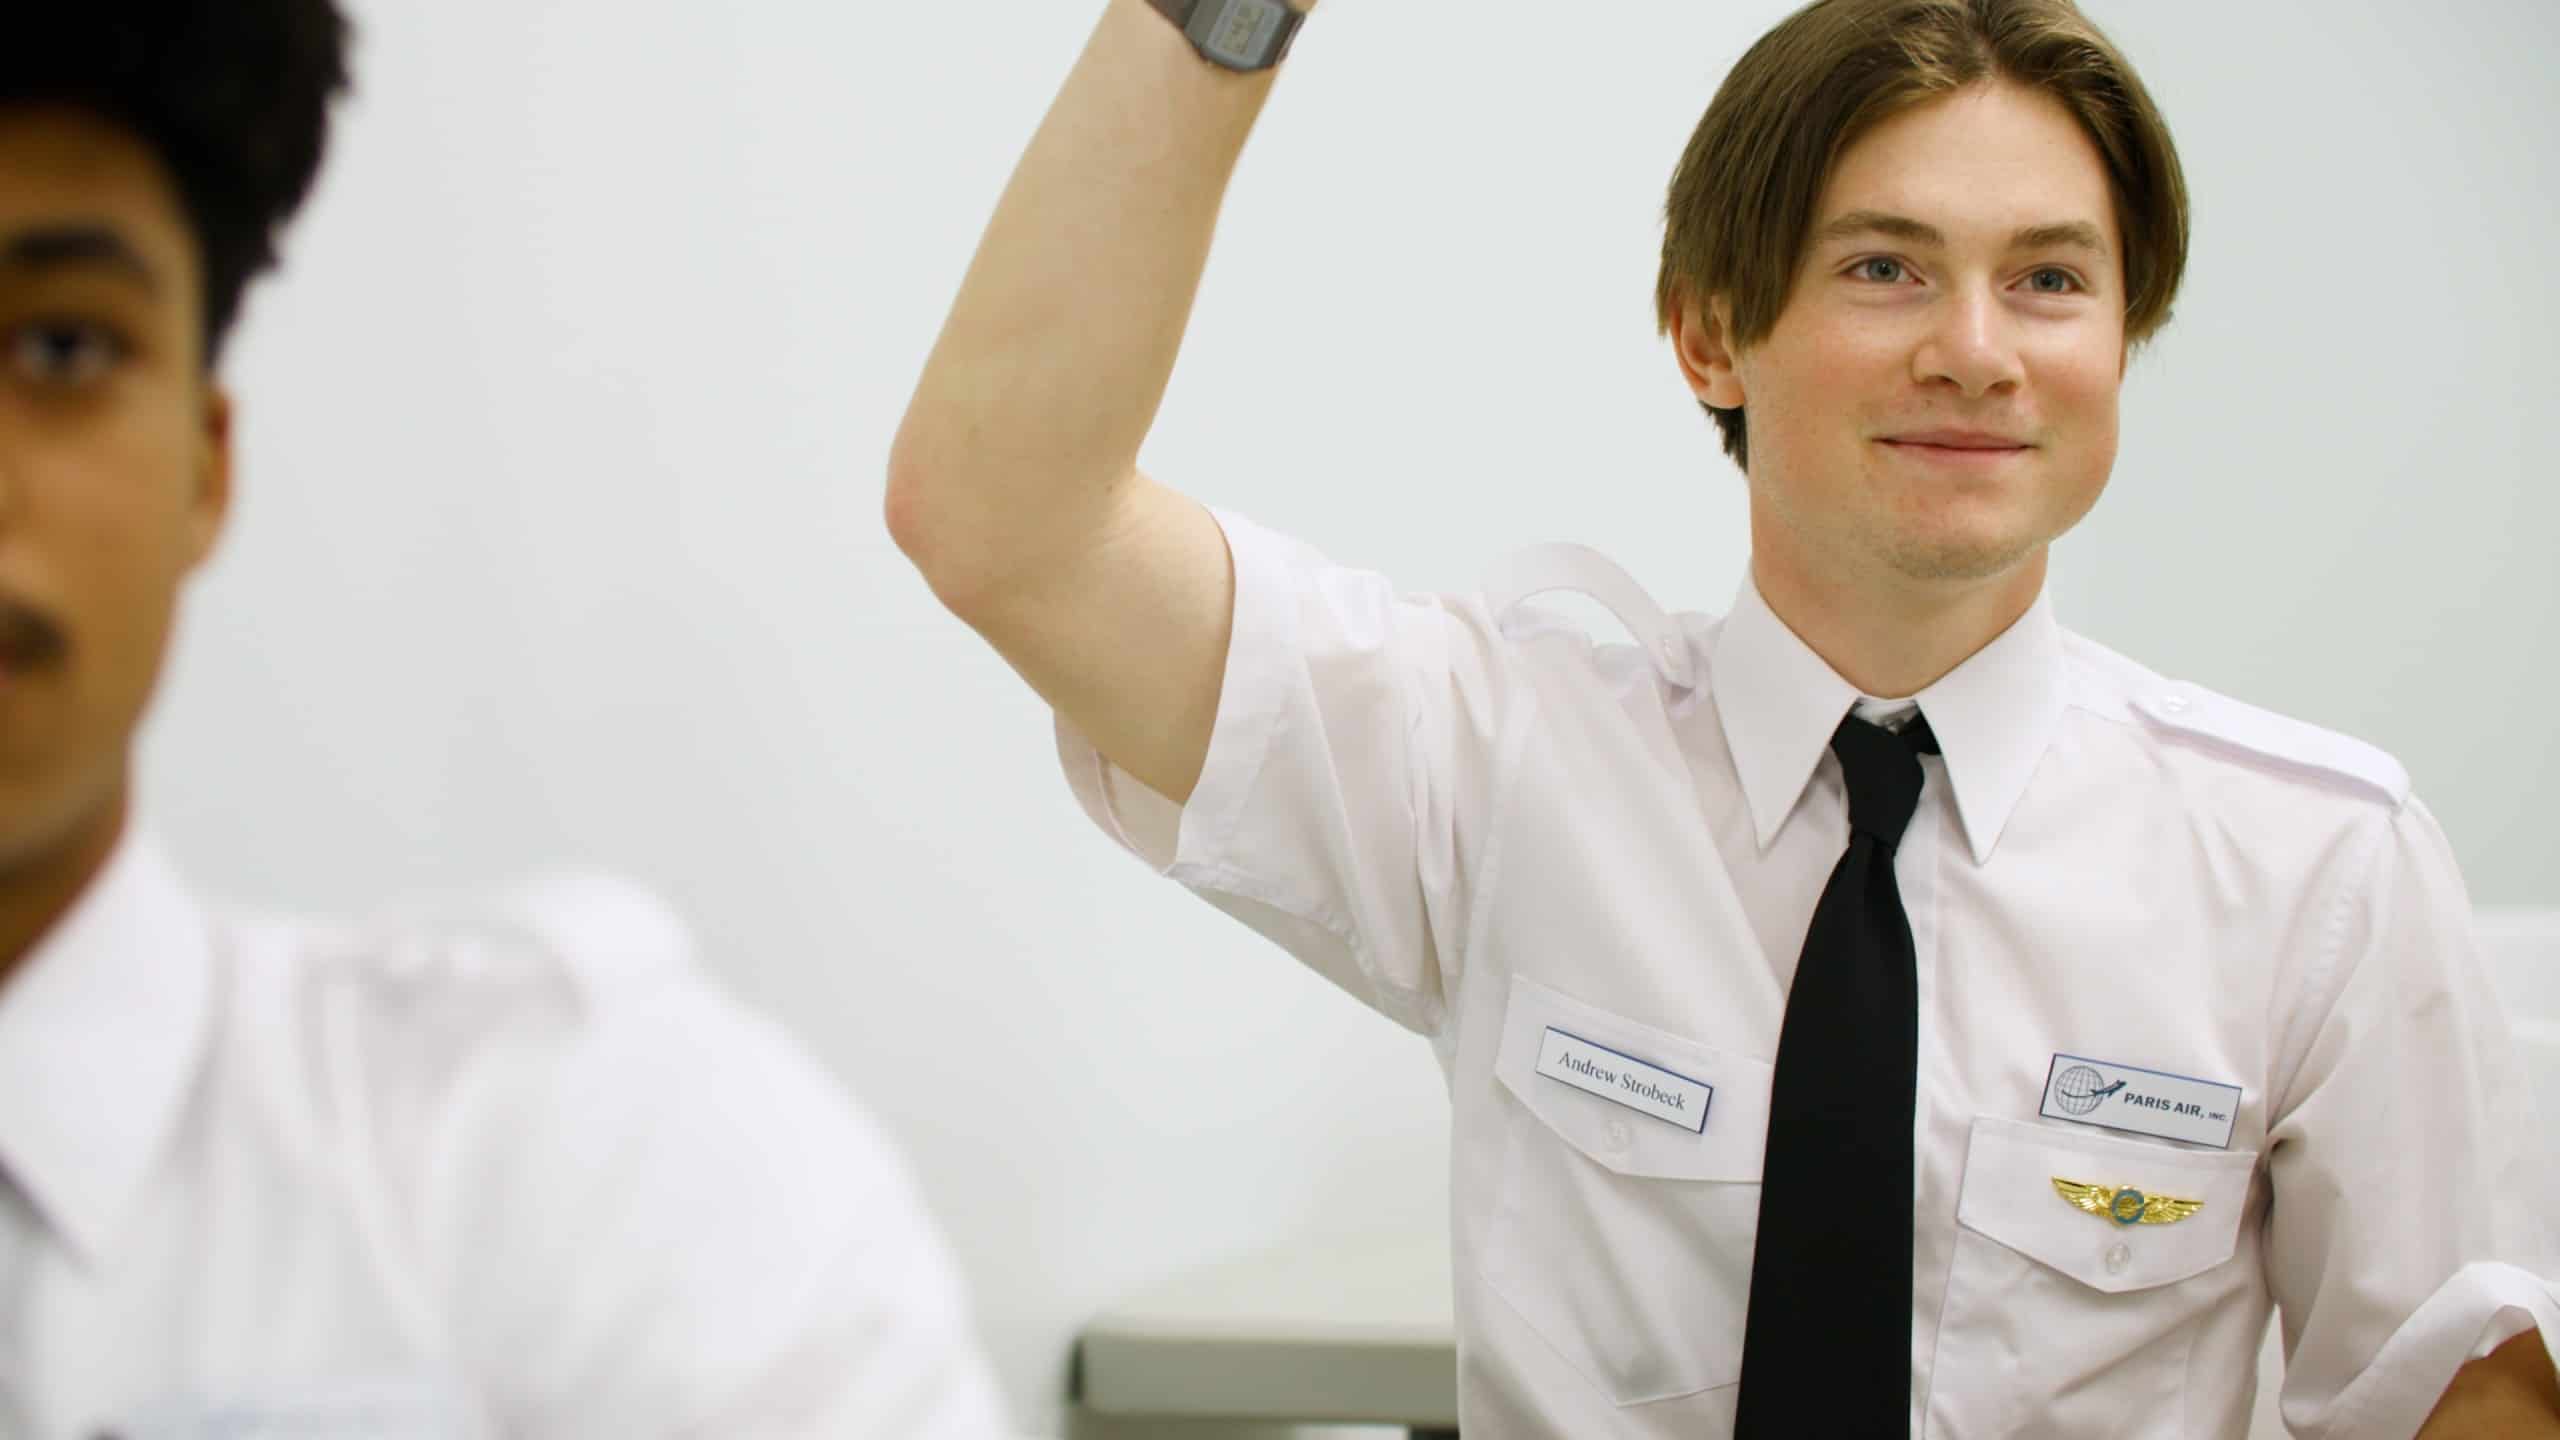 A Paris Air flight student raising his hand, with another student in the foreground